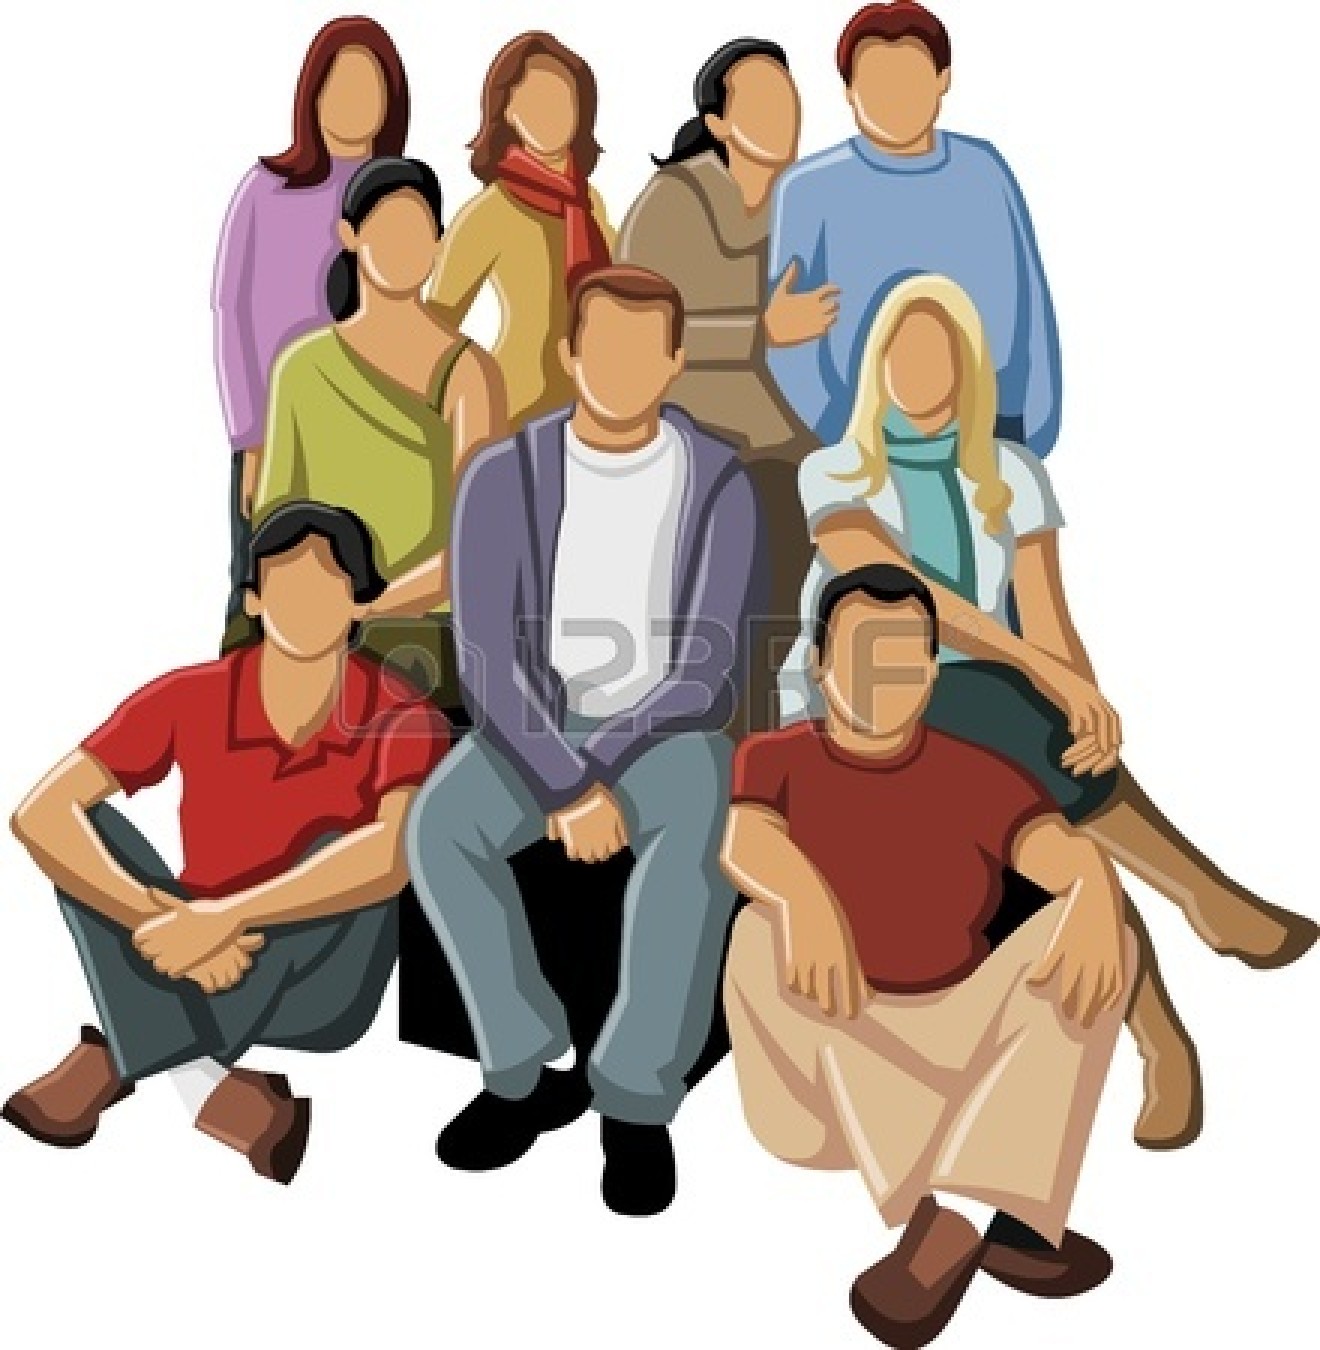 clipart of group of people - Clip Art Library